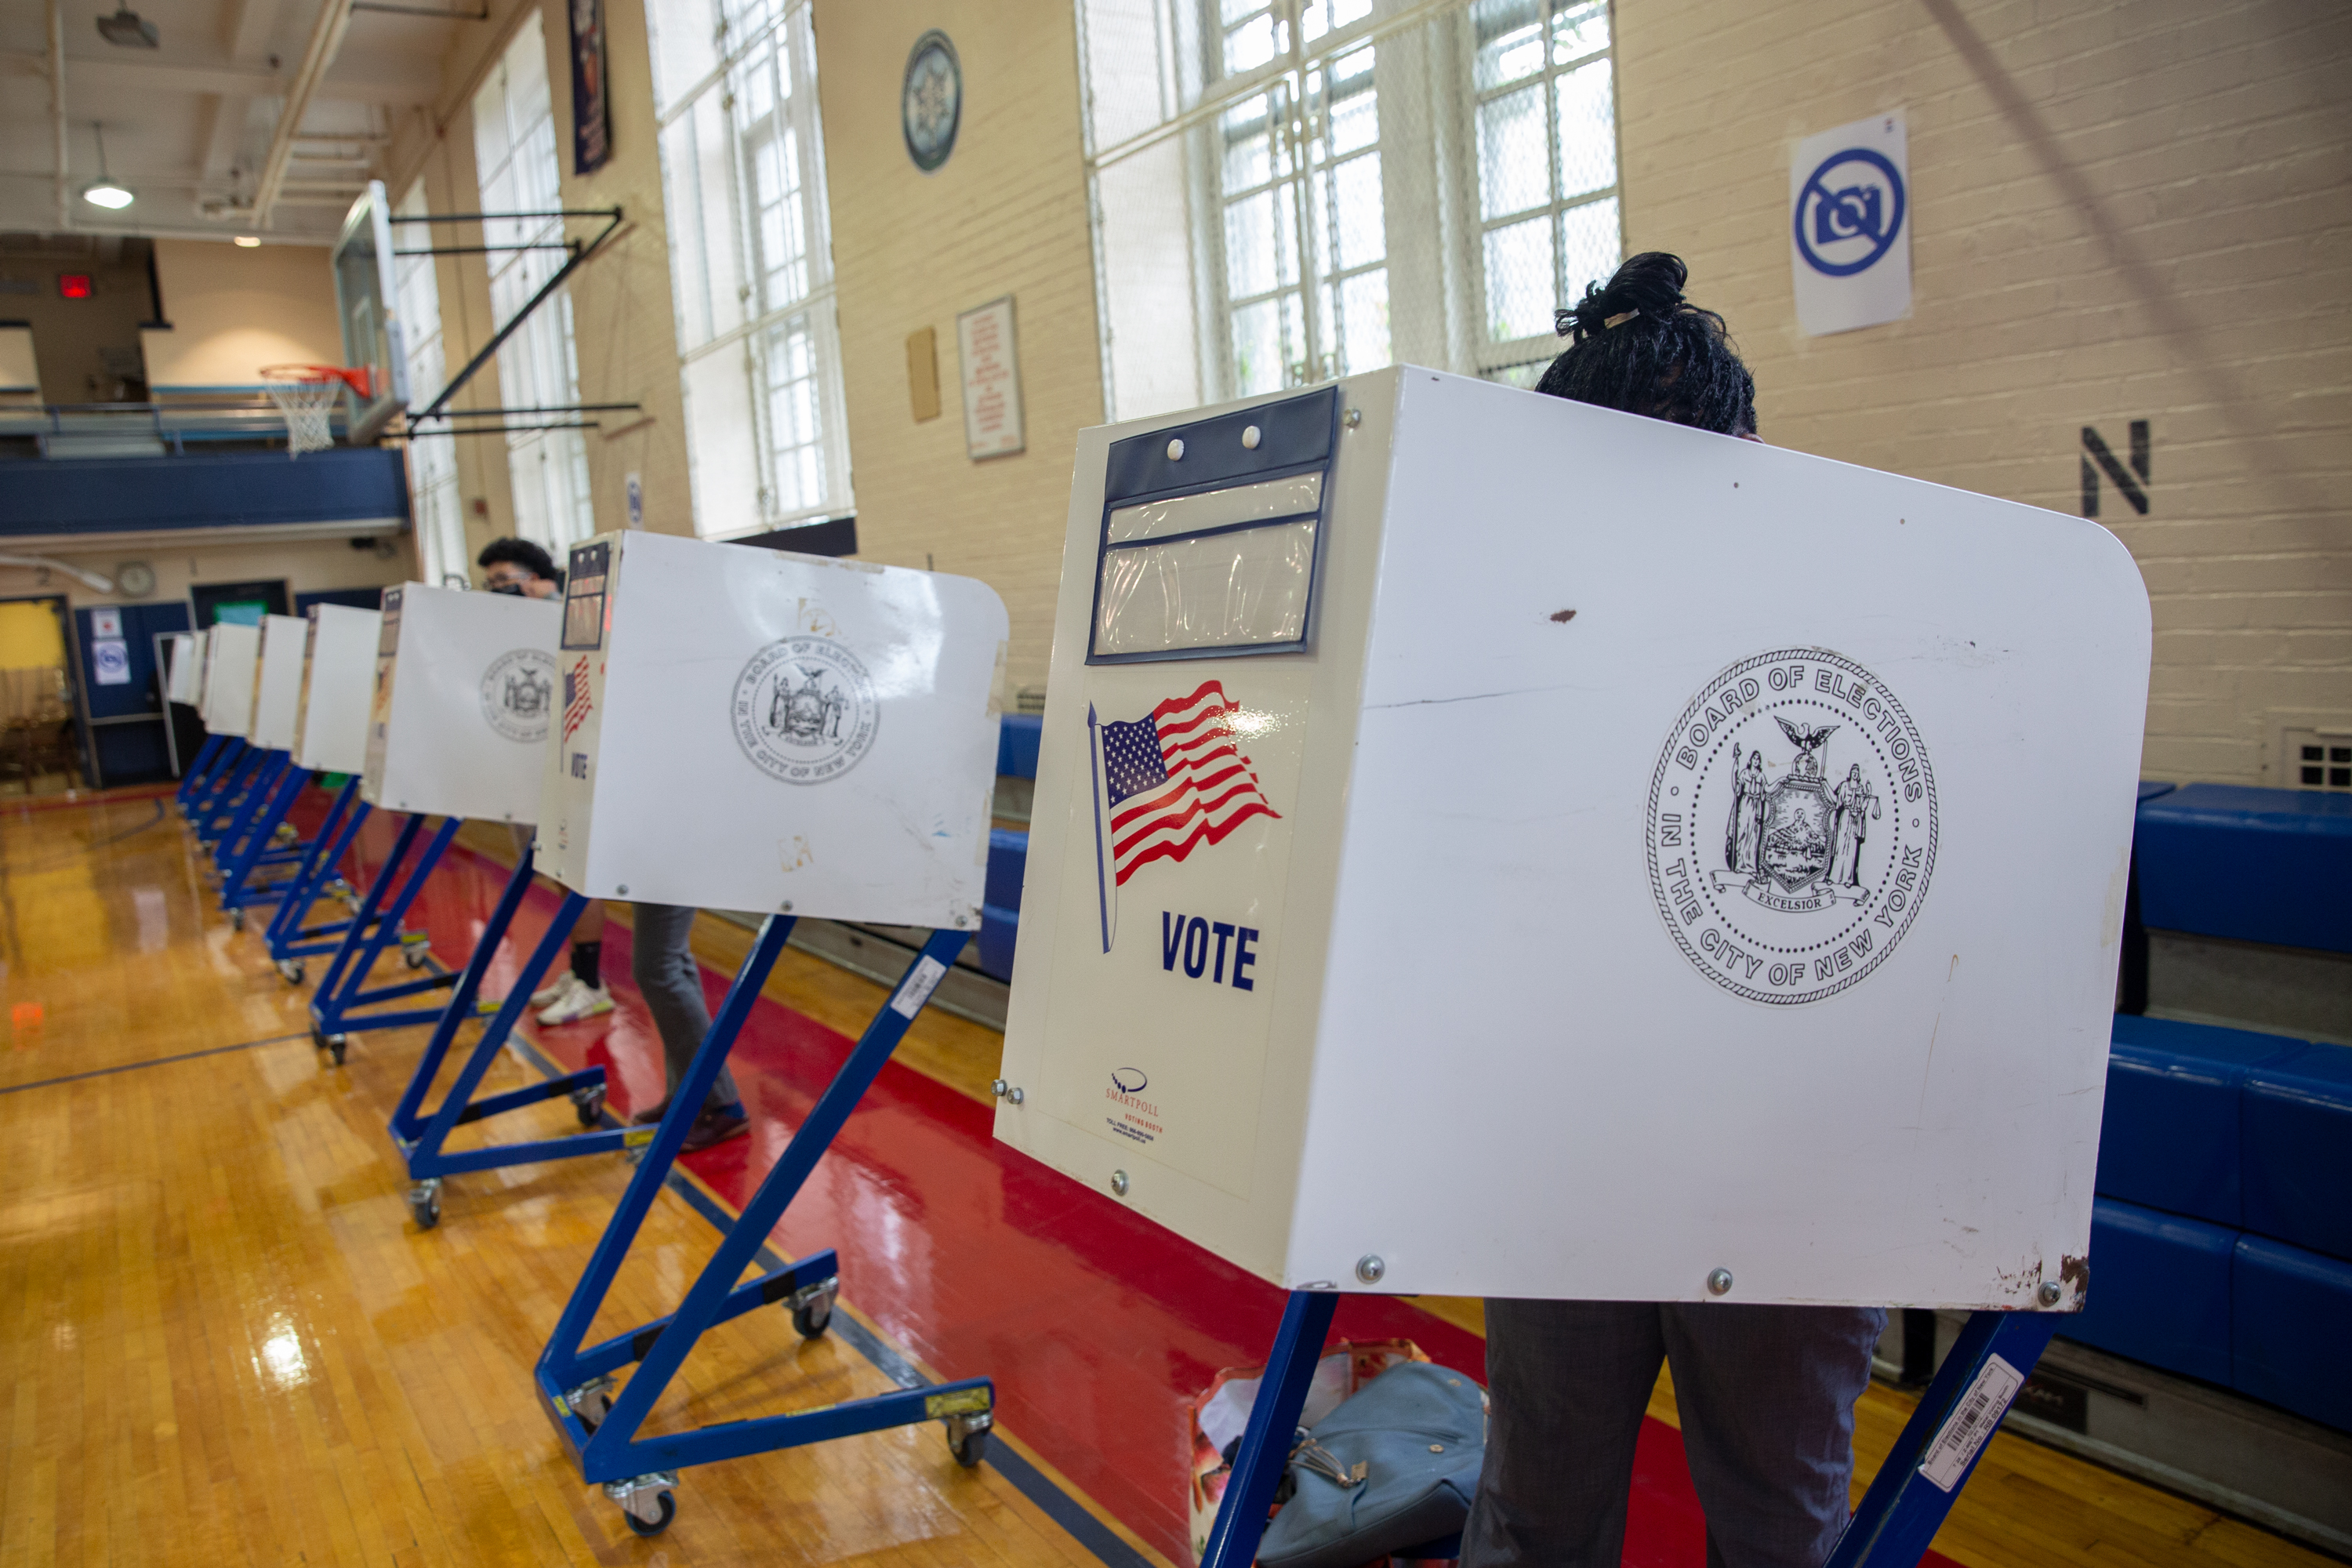 People take part in early voting at the Erasmus Educational Complex in Brooklyn, June 14, 2021.